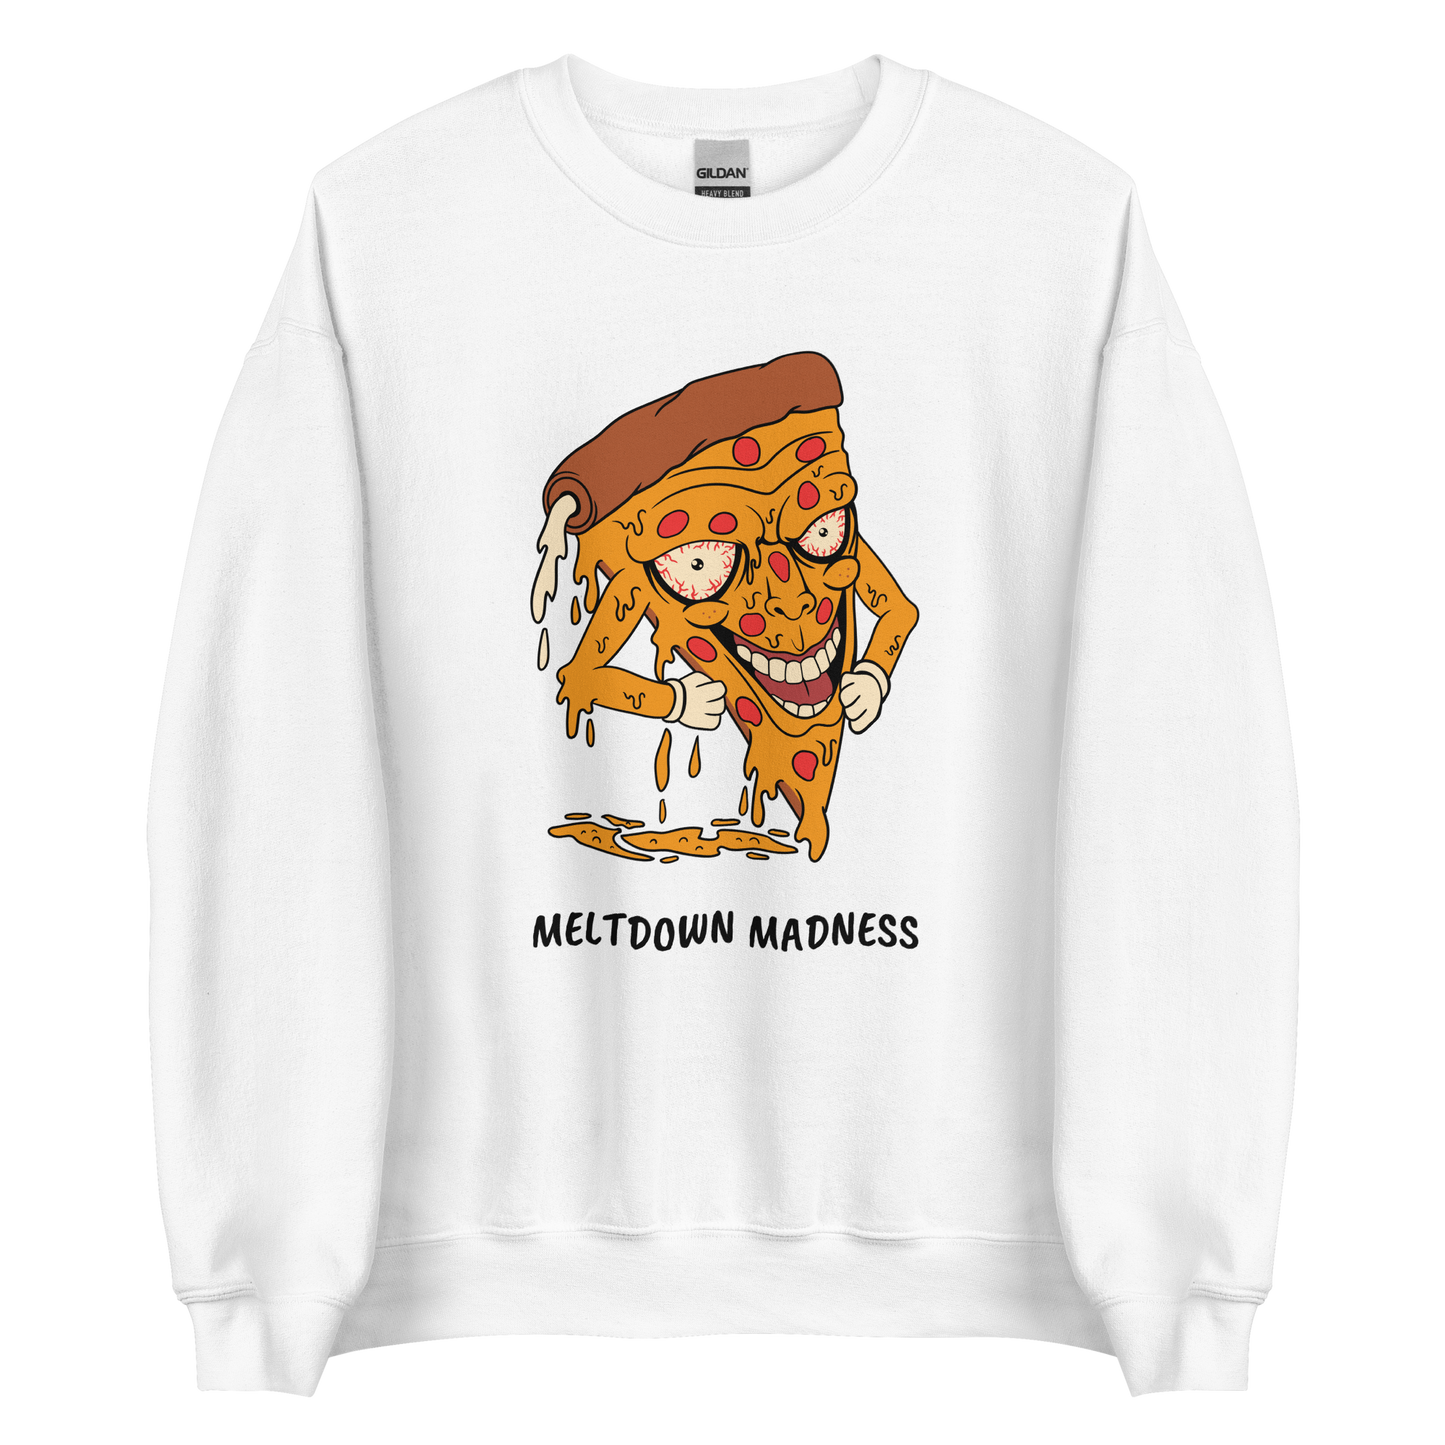 White Melting Pizza Sweatshirt featuring a Meltdown Madness graphic on the chest - Funny Graphic Pizza Sweatshirts - Boozy Fox